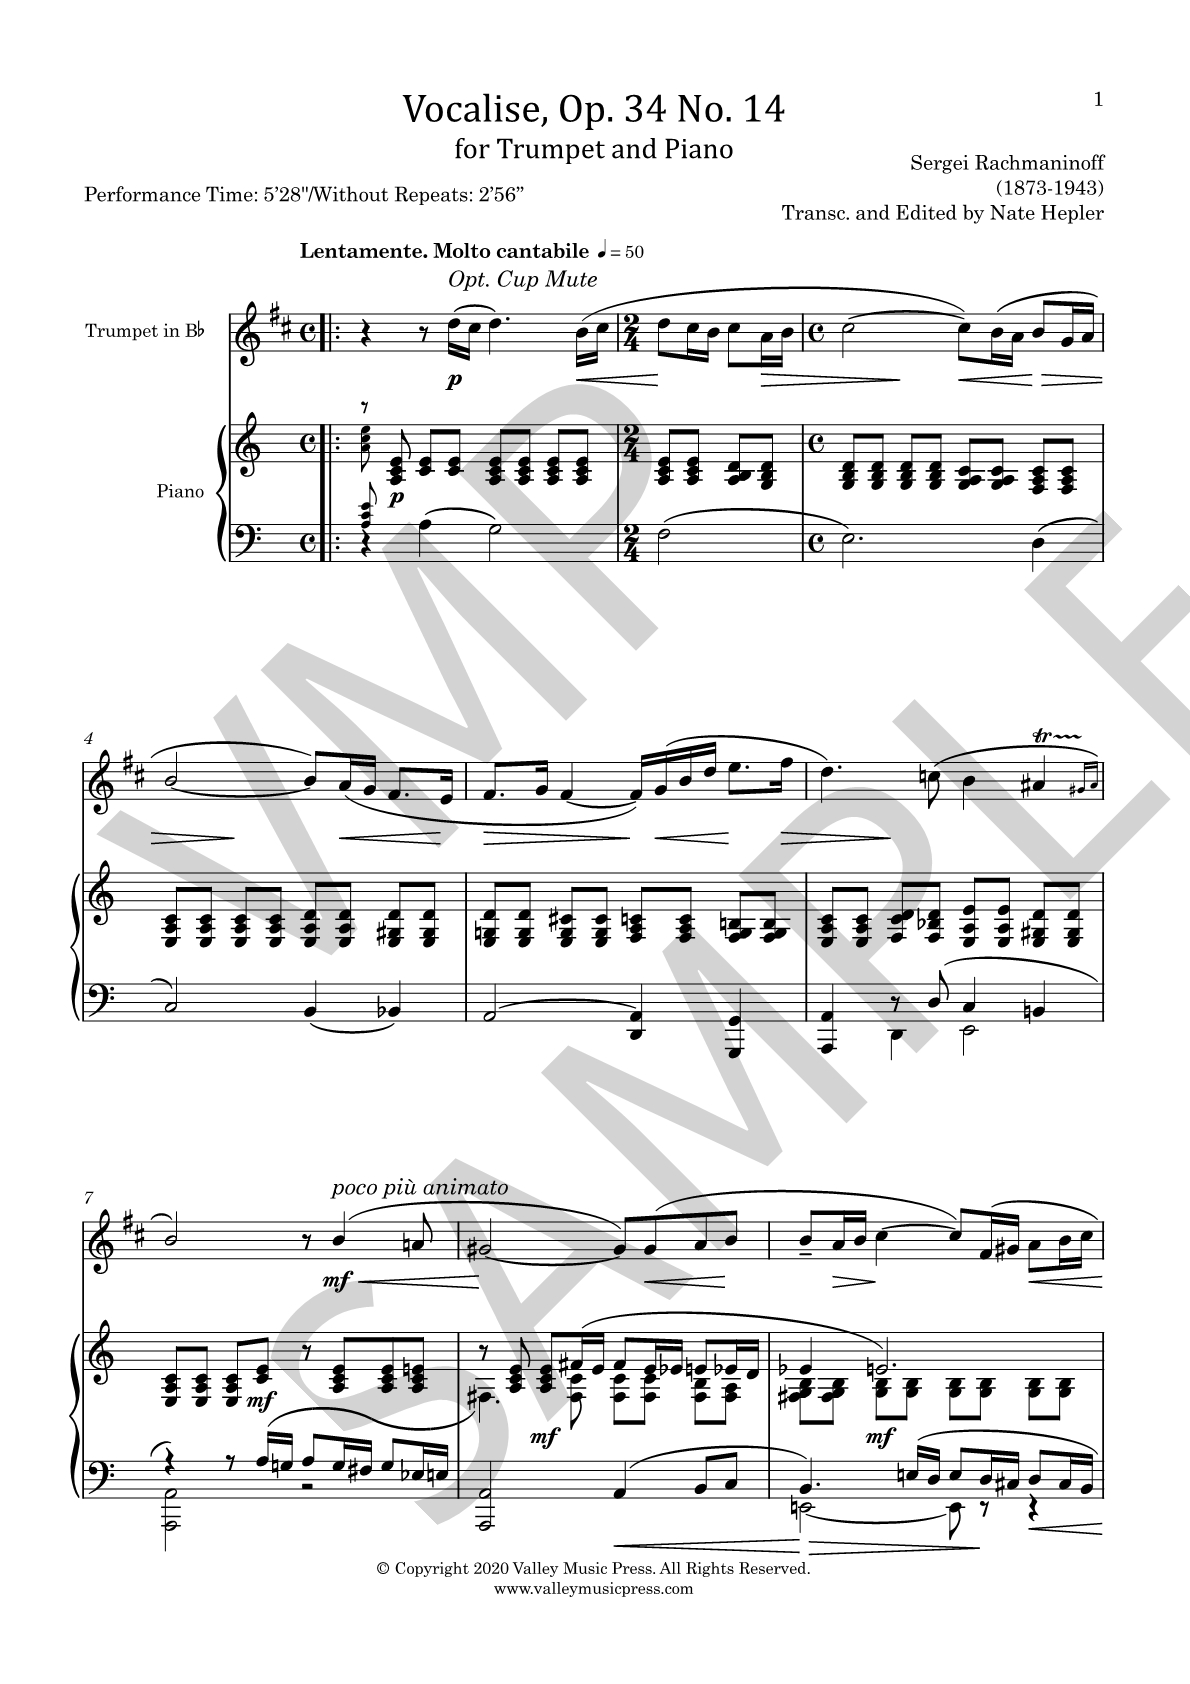 Rachmaninoff - Vocalise Op. 34 No. 14 (Trp & Piano) - Click Image to Close